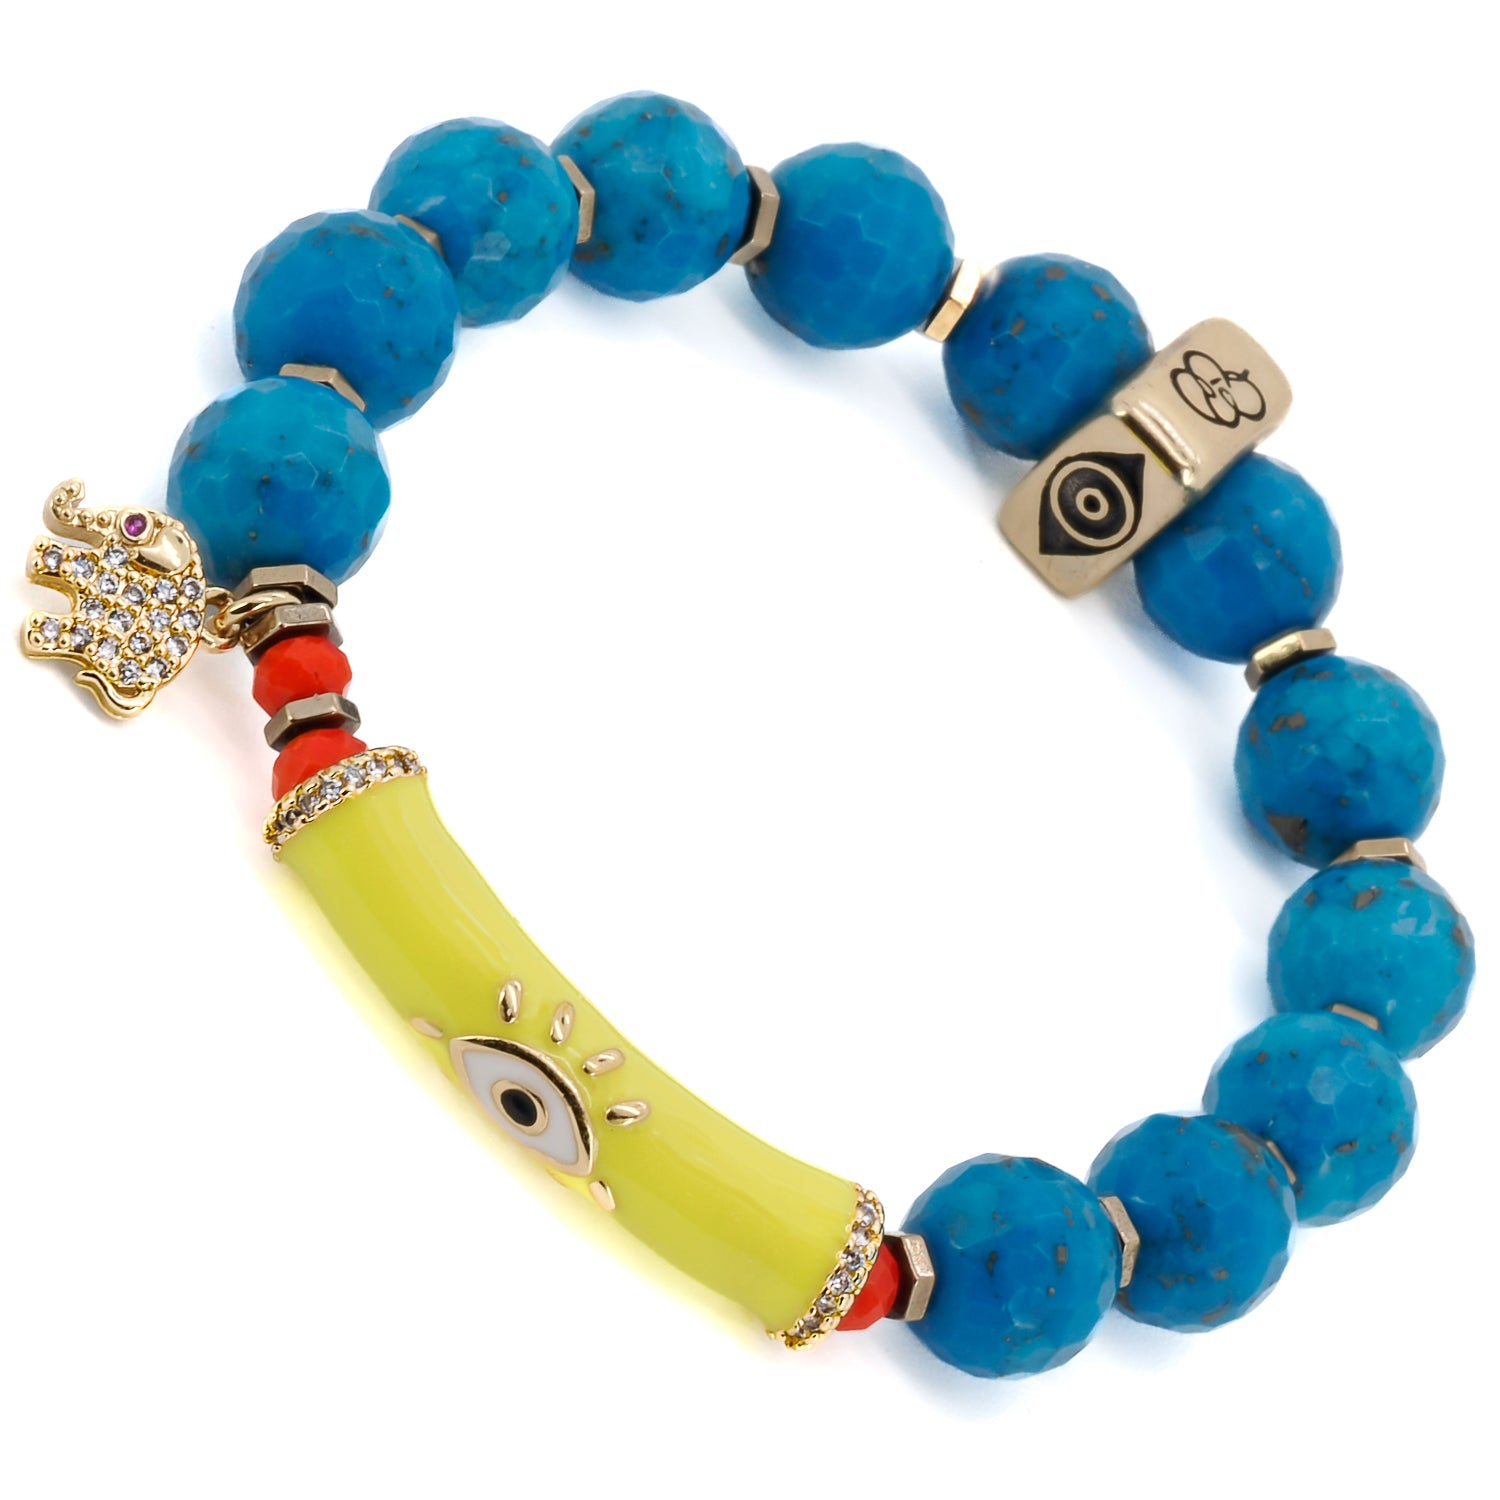 Find inner peace and ward off negativity with the Turquoise Unique Protection Bracelet, crafted with natural turquoise stones.